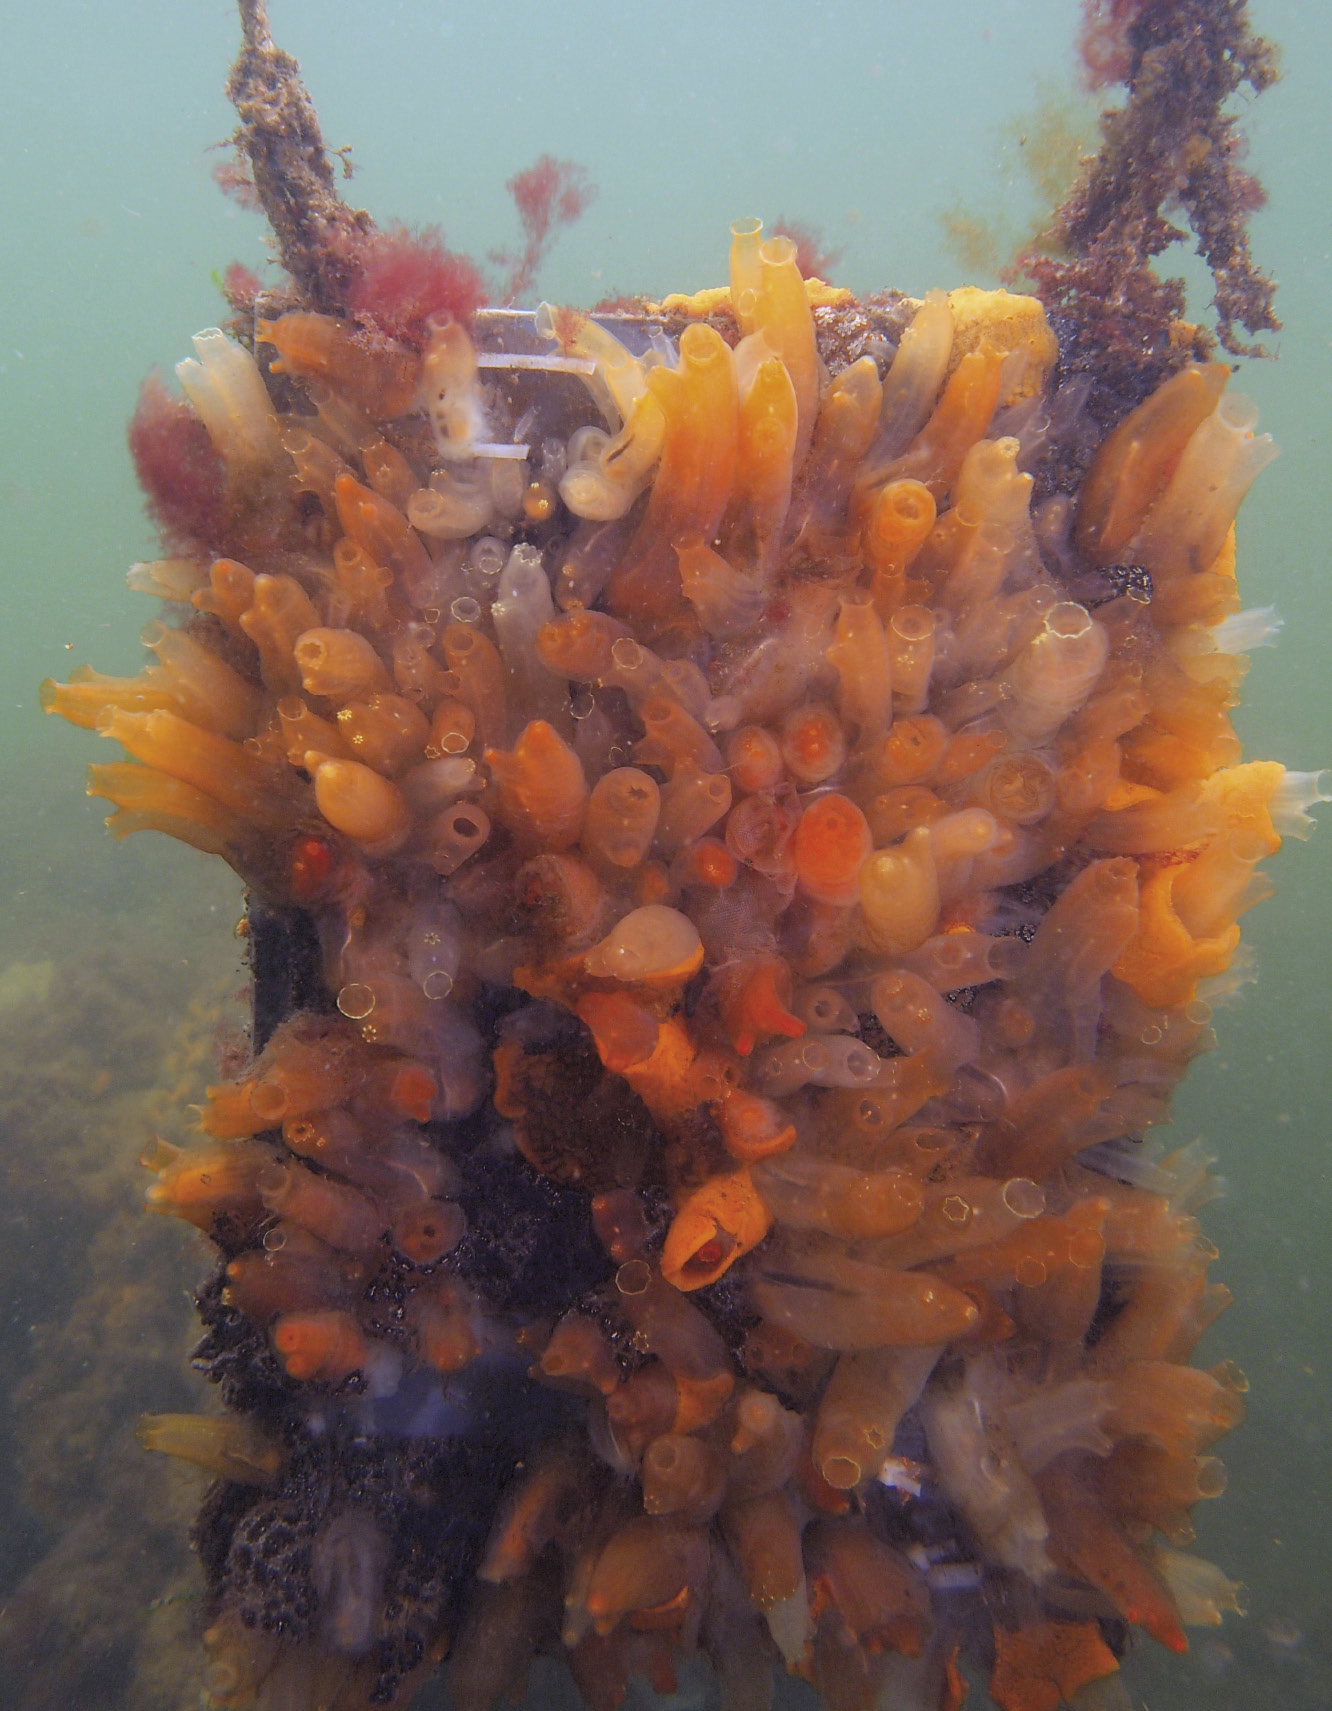 Invasive tunicates adhering to an experimental underwater structure